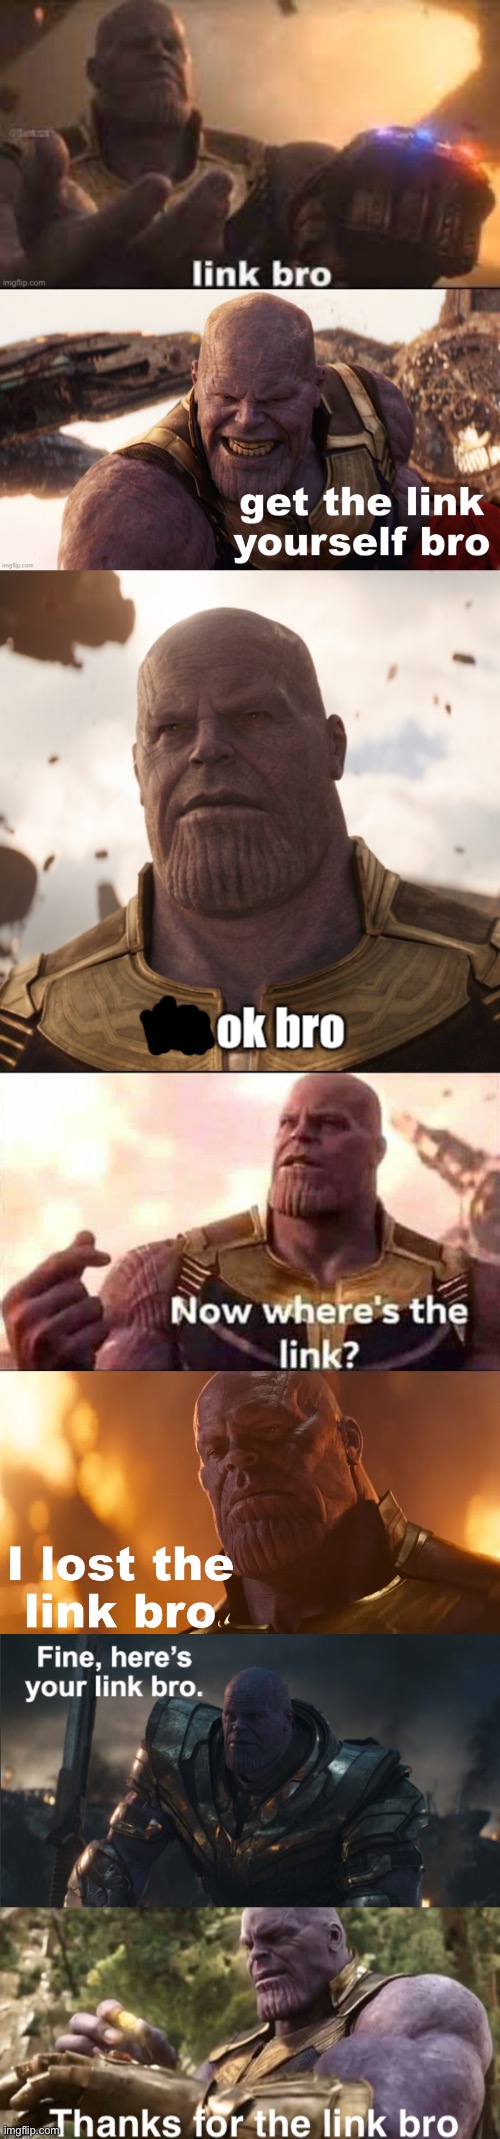 Link bro comic part 1 | image tagged in link bro,get the link yourself bro,its ok bro,now where's the link,i lost the link bro,fine here s your link bro | made w/ Imgflip meme maker